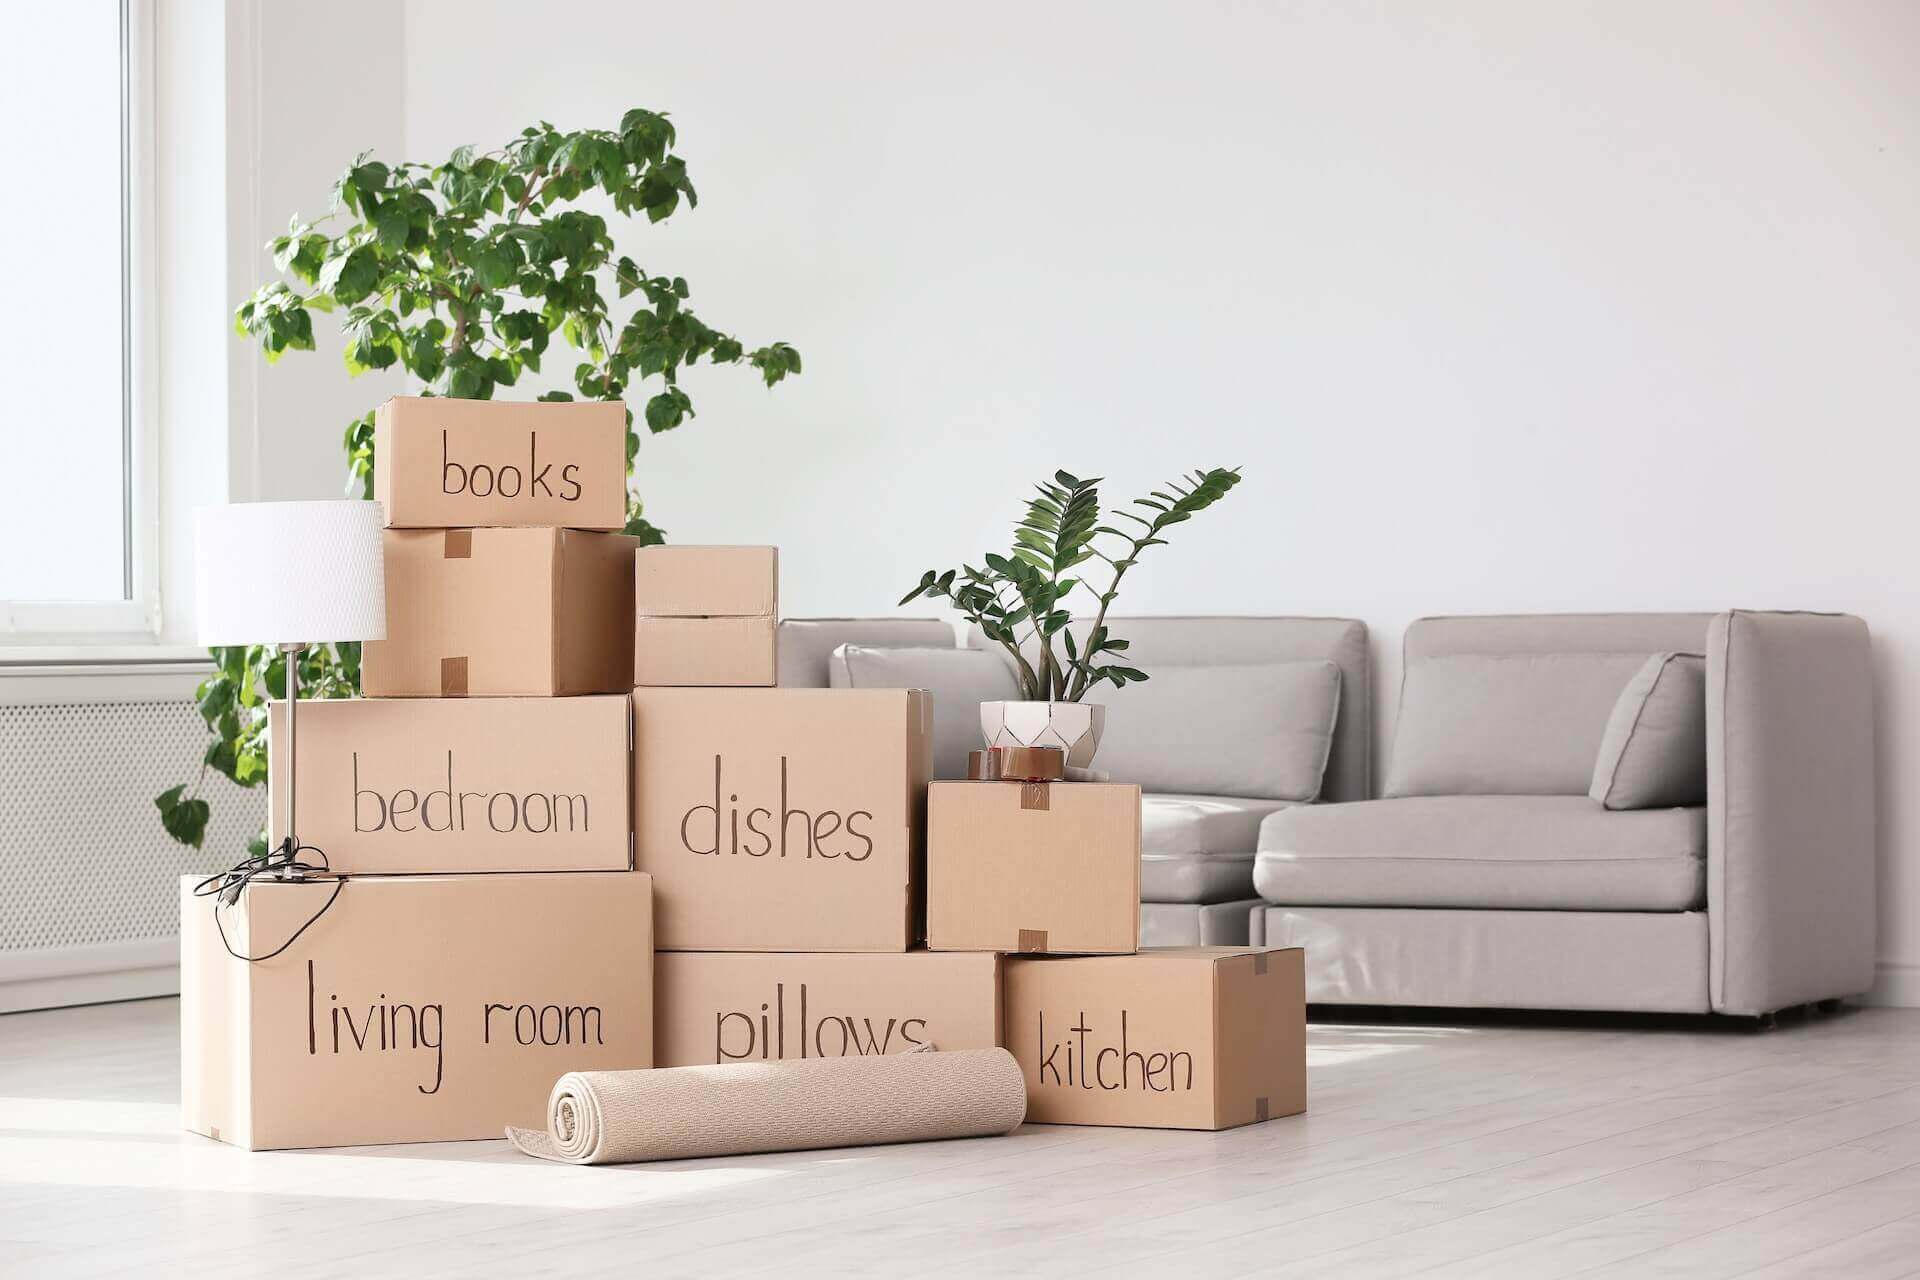 Labeled boxes for moving overseas, plants, and a sofa in the living room